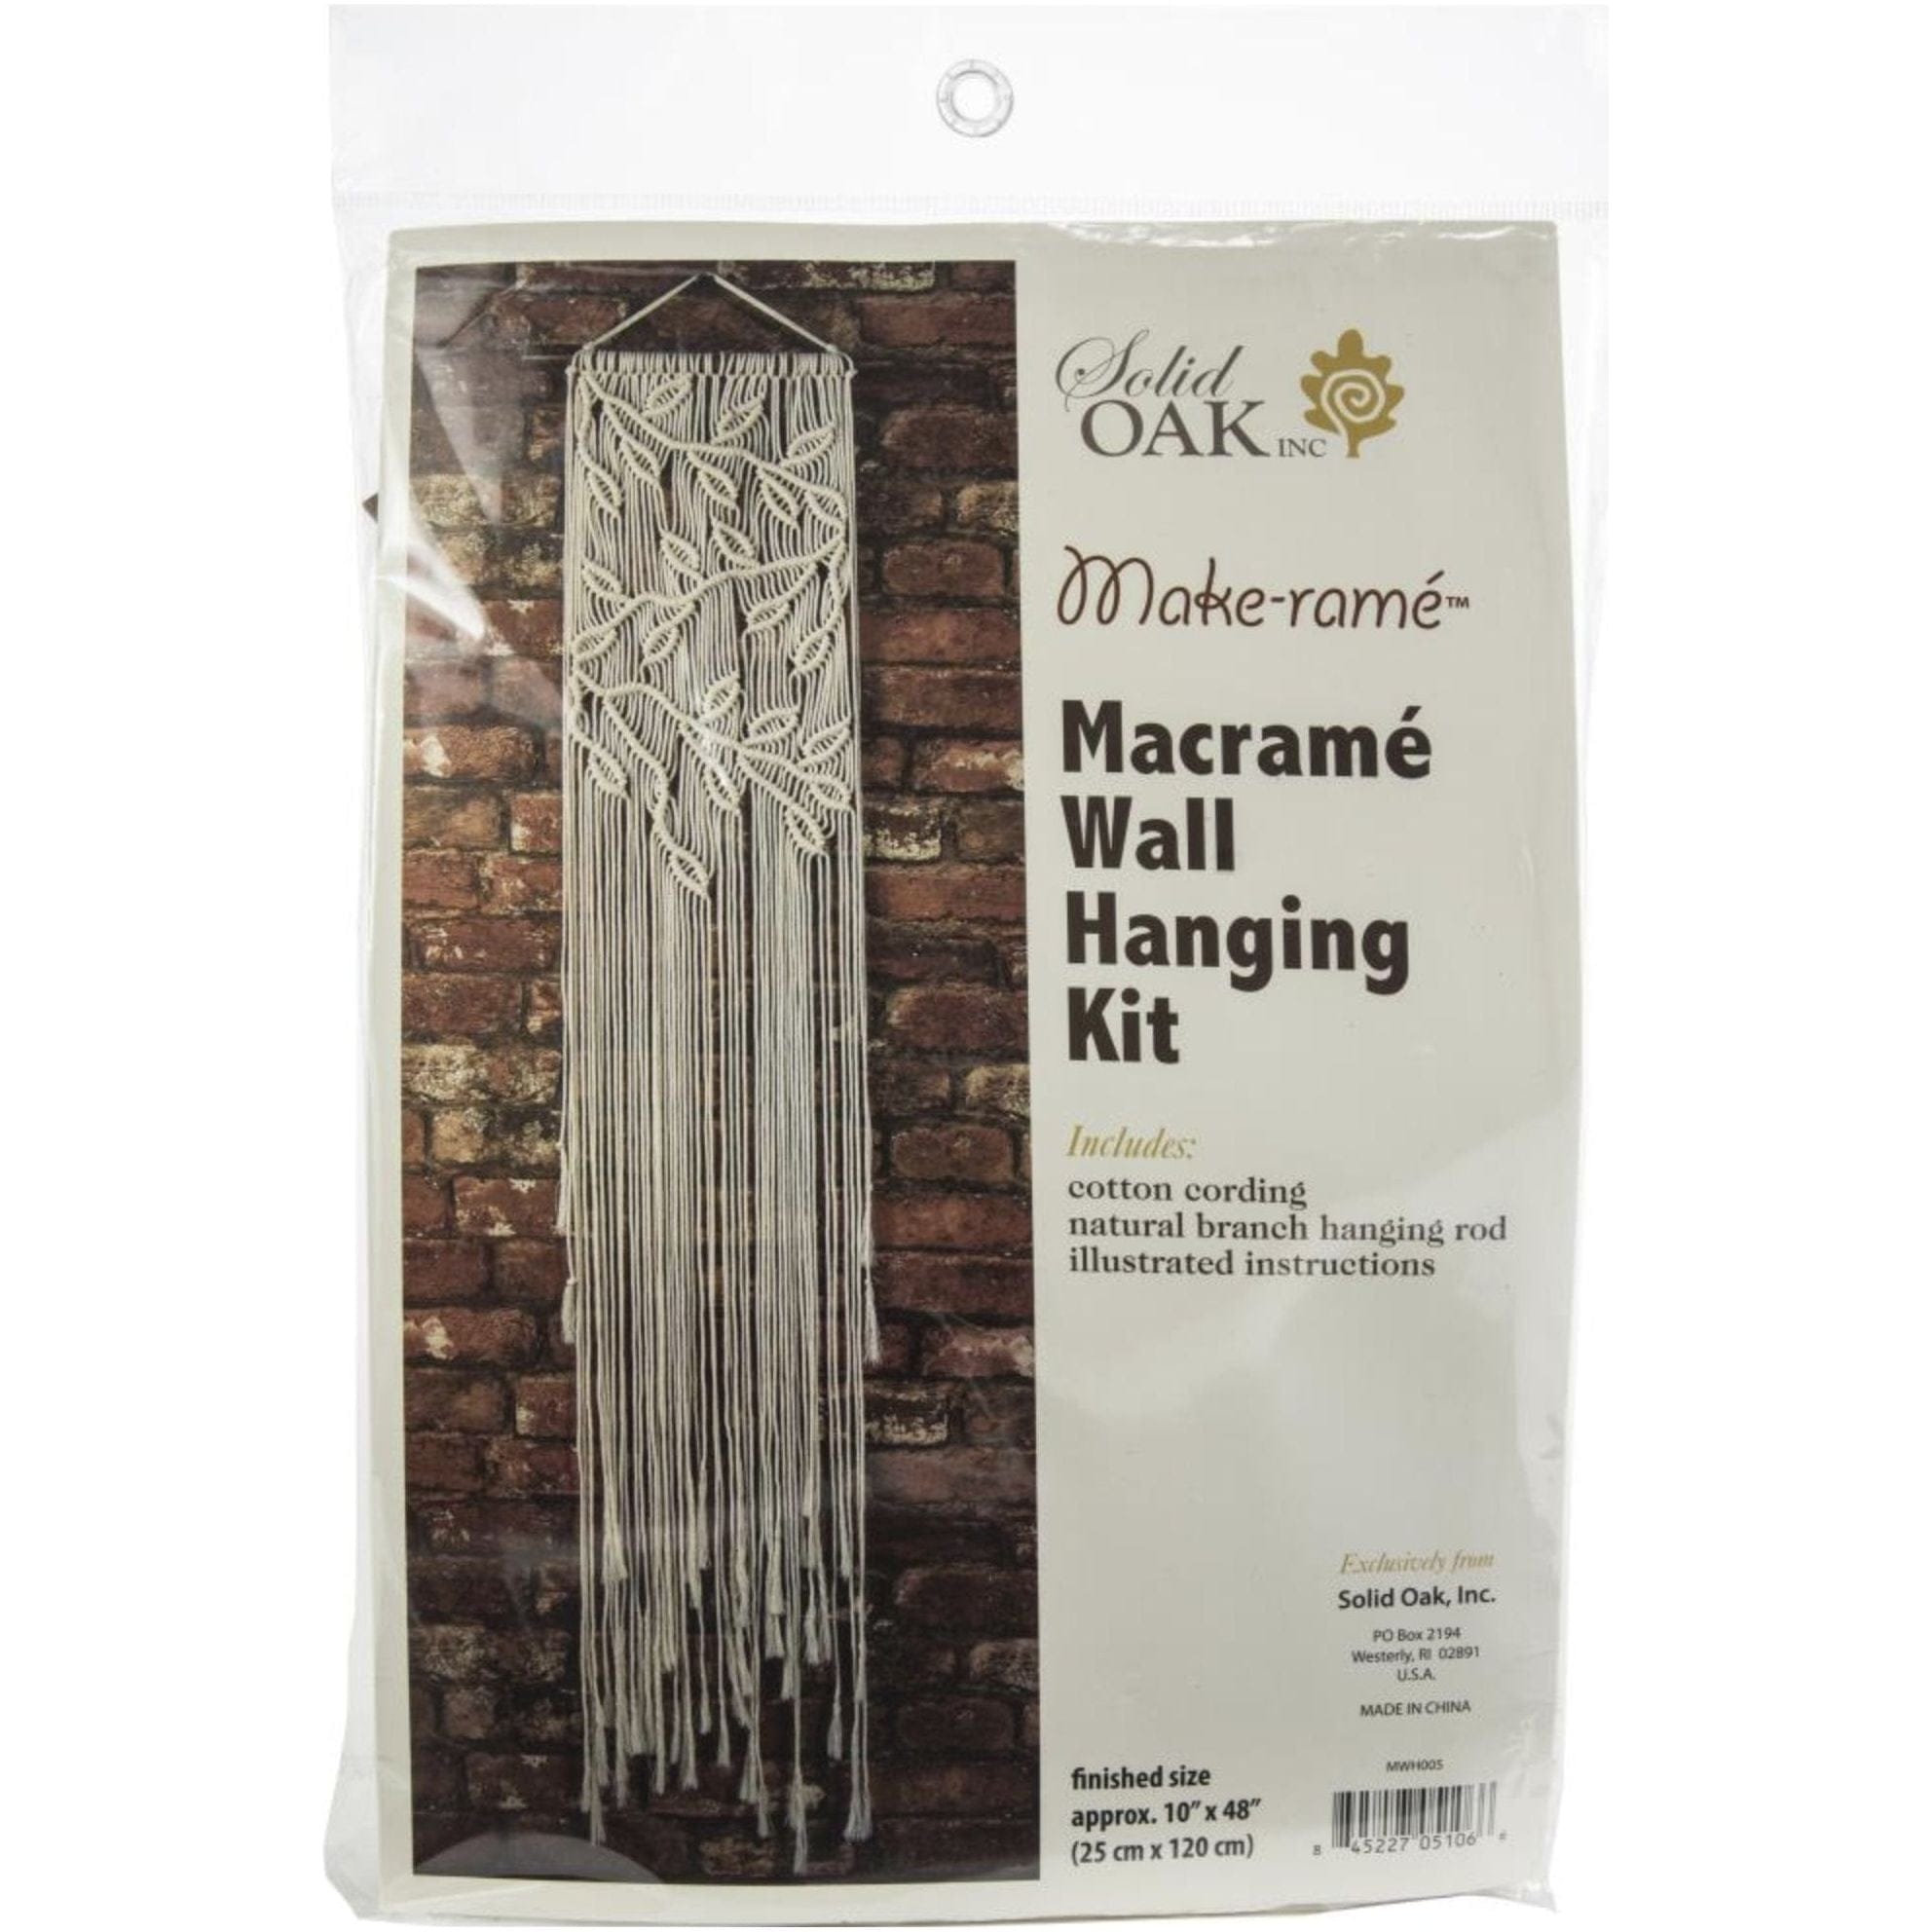 Macrame Wall Hanging Kit Leaves and Branches